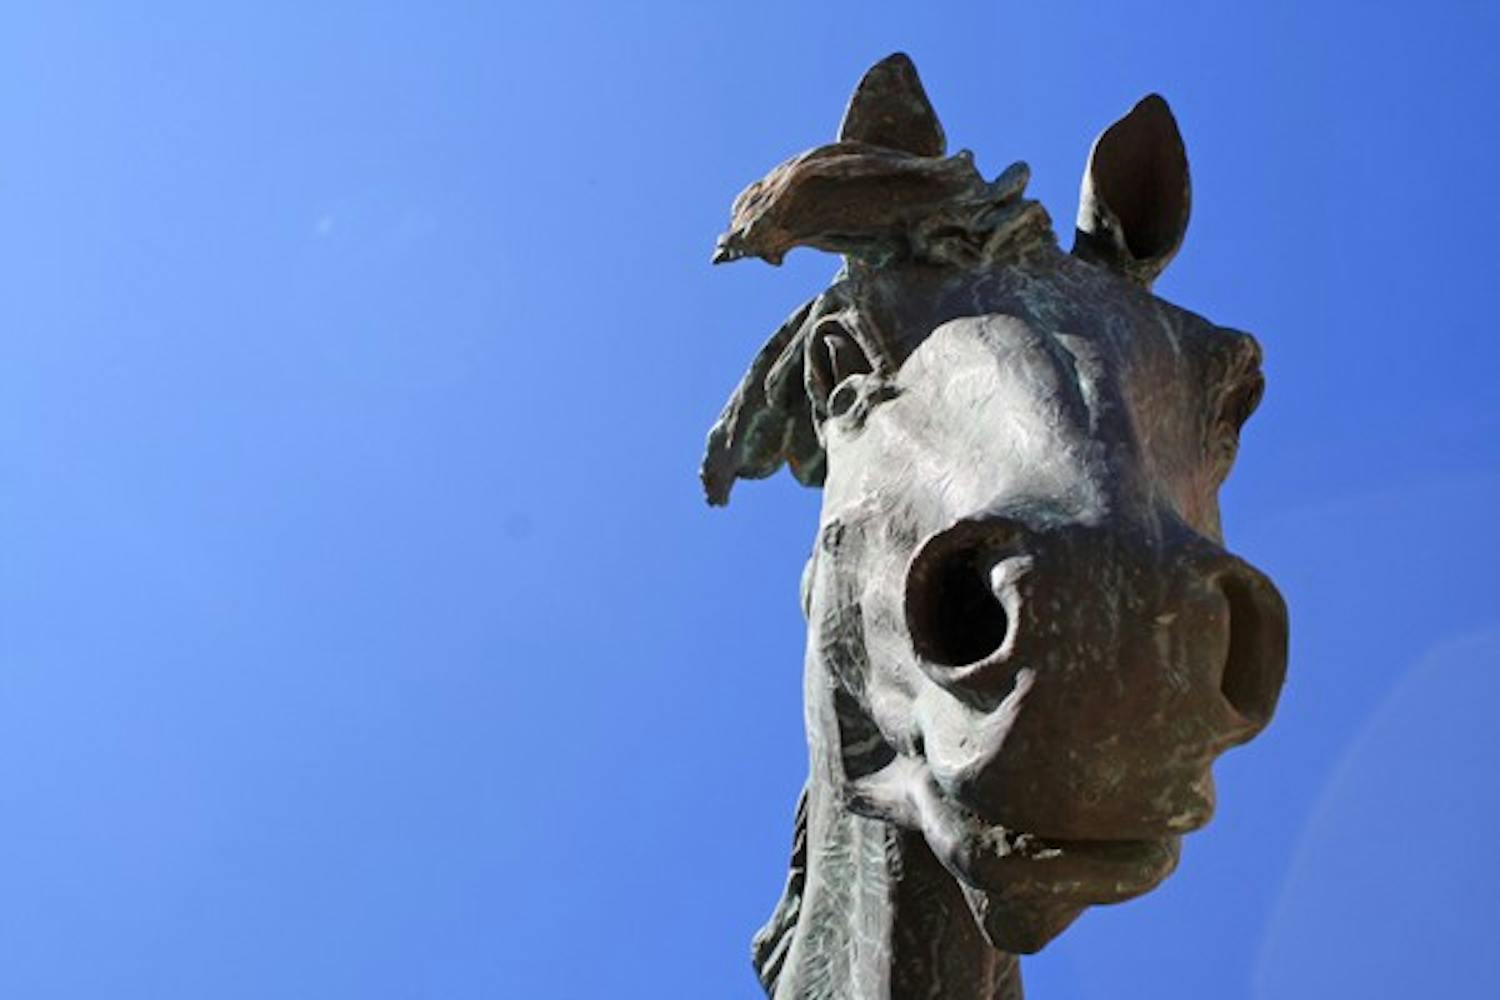 "Spirit," a sculpture of five horses by Buck McCain, stands majestically in the spring sunshine outside the W.P. Carey School of Business on the Tempe campus. (Photo by Jessie Wardarski)